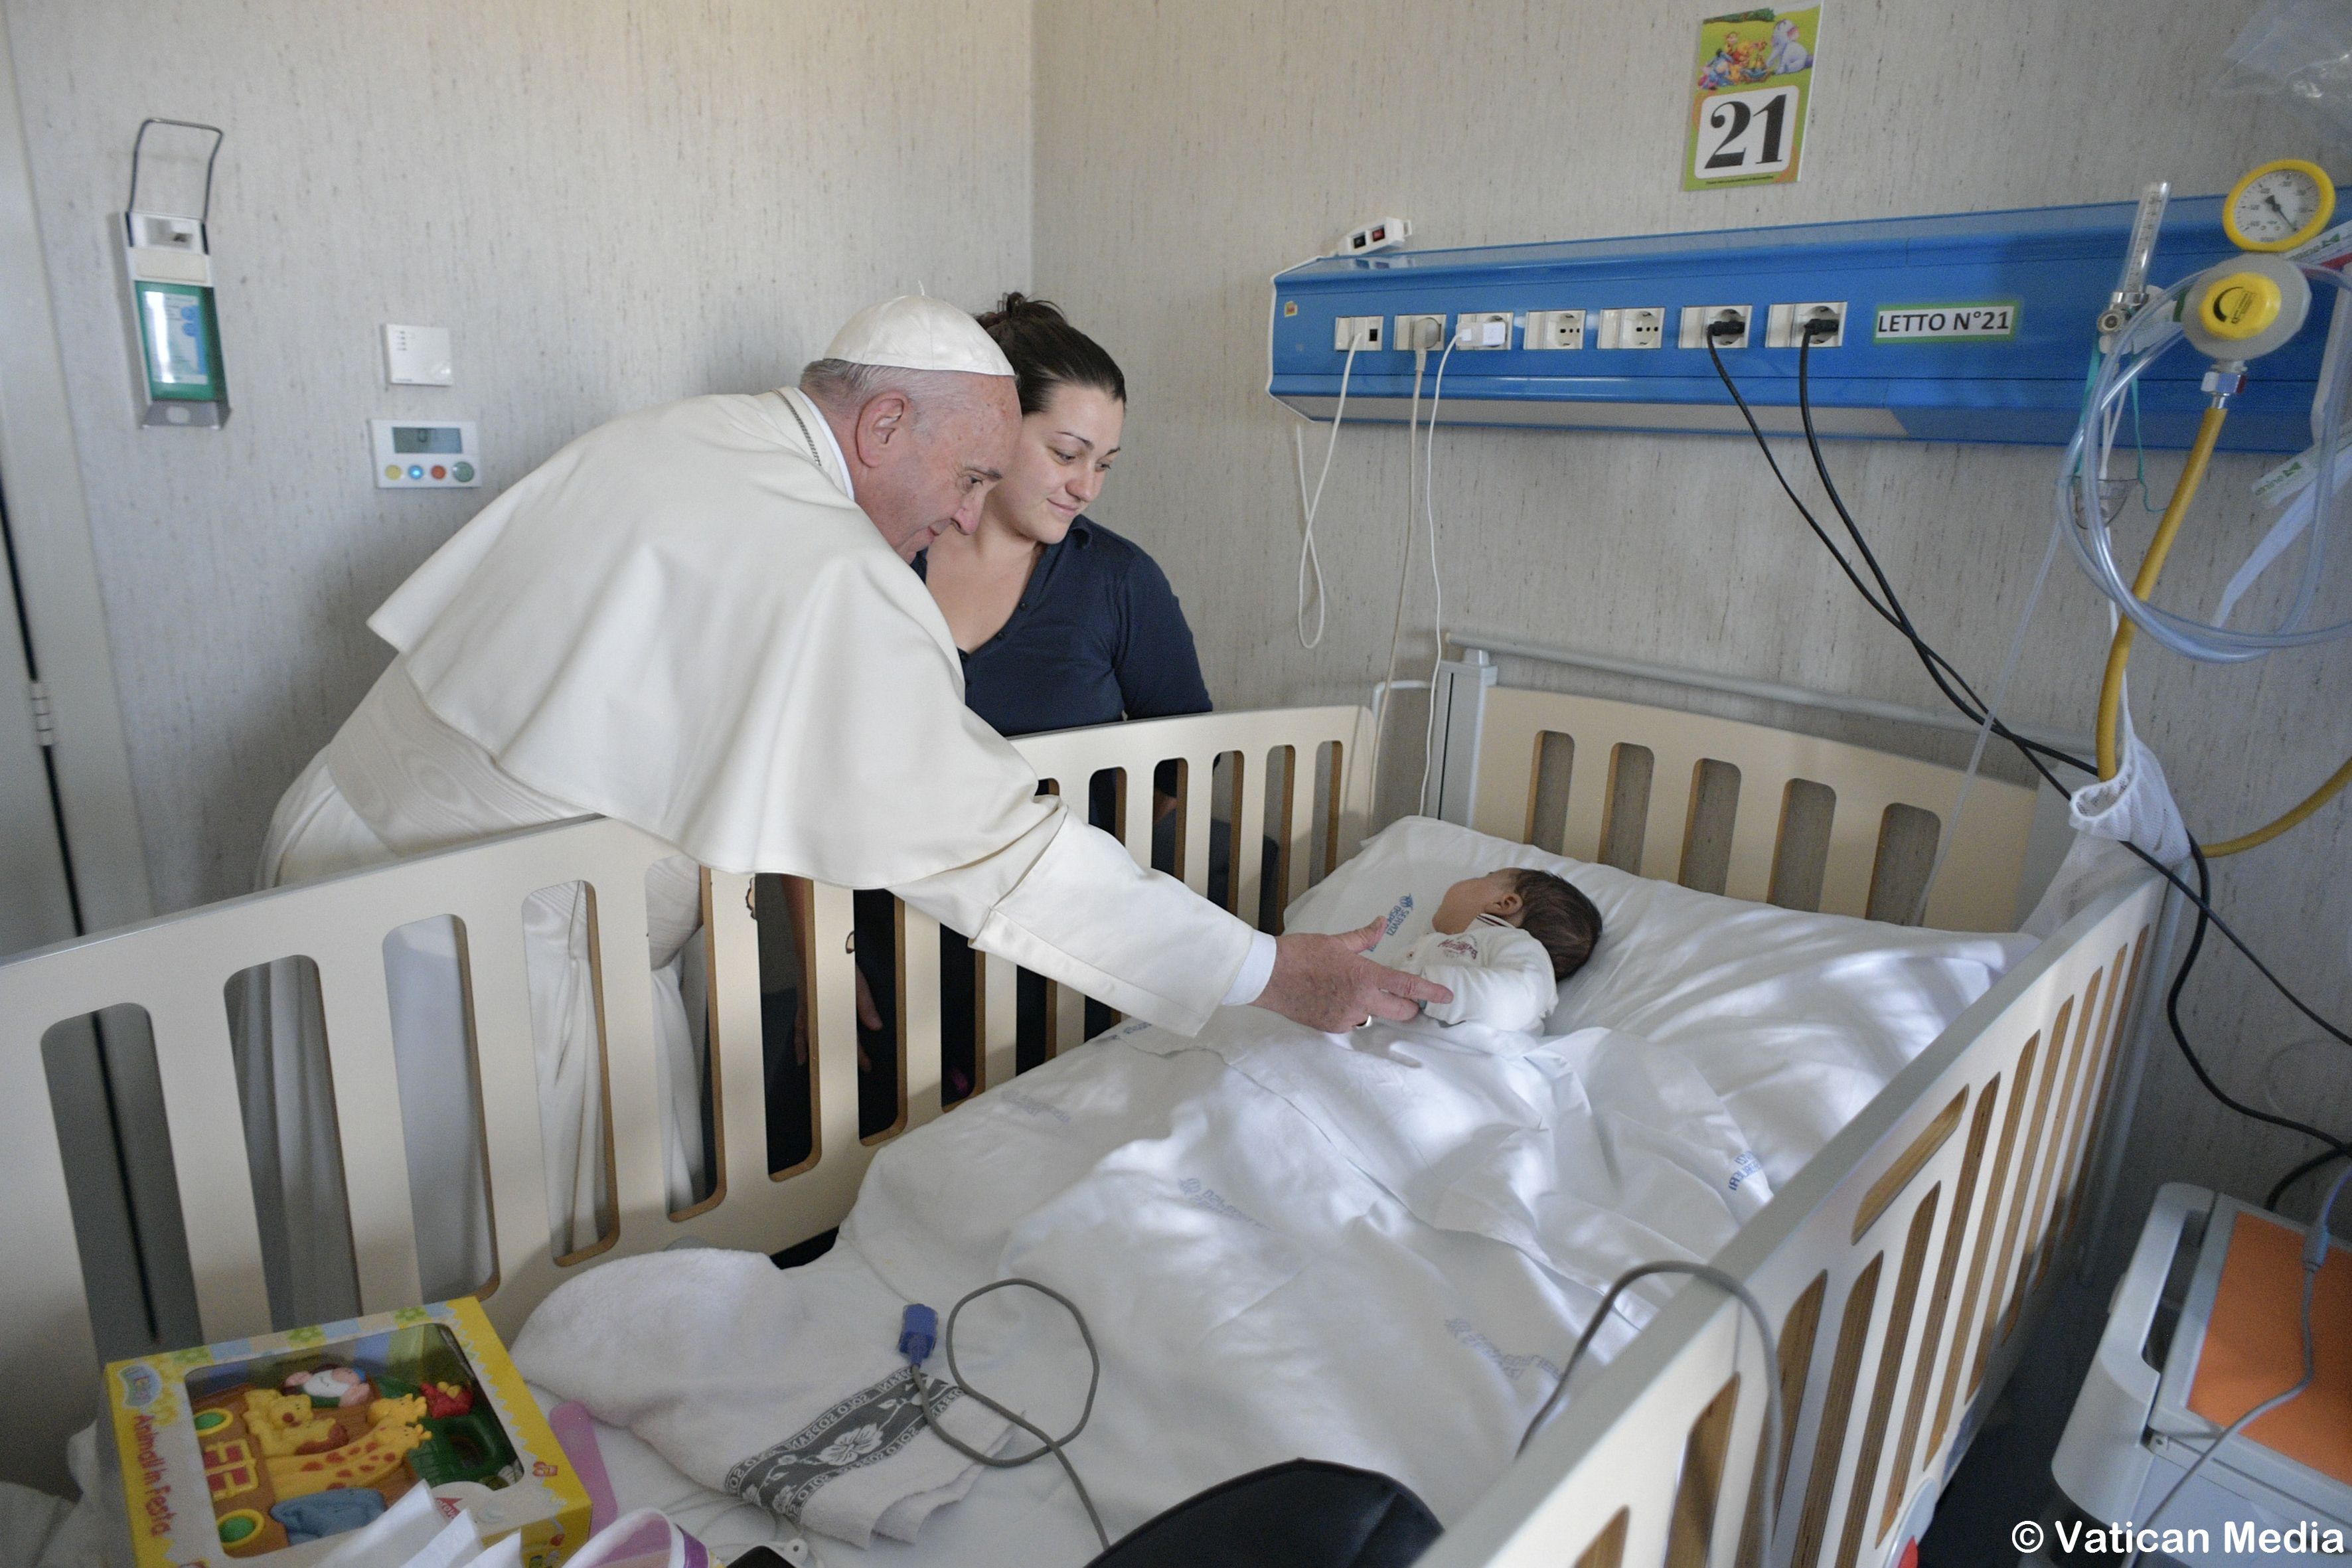 Pope Francis greets a patient during an unannounced visit Jan. 5 to children at the Palidoro Bambino Gesu Hospital, in Fiumicino, outside Rome. (CNS photo/L'Osservatore Romano)